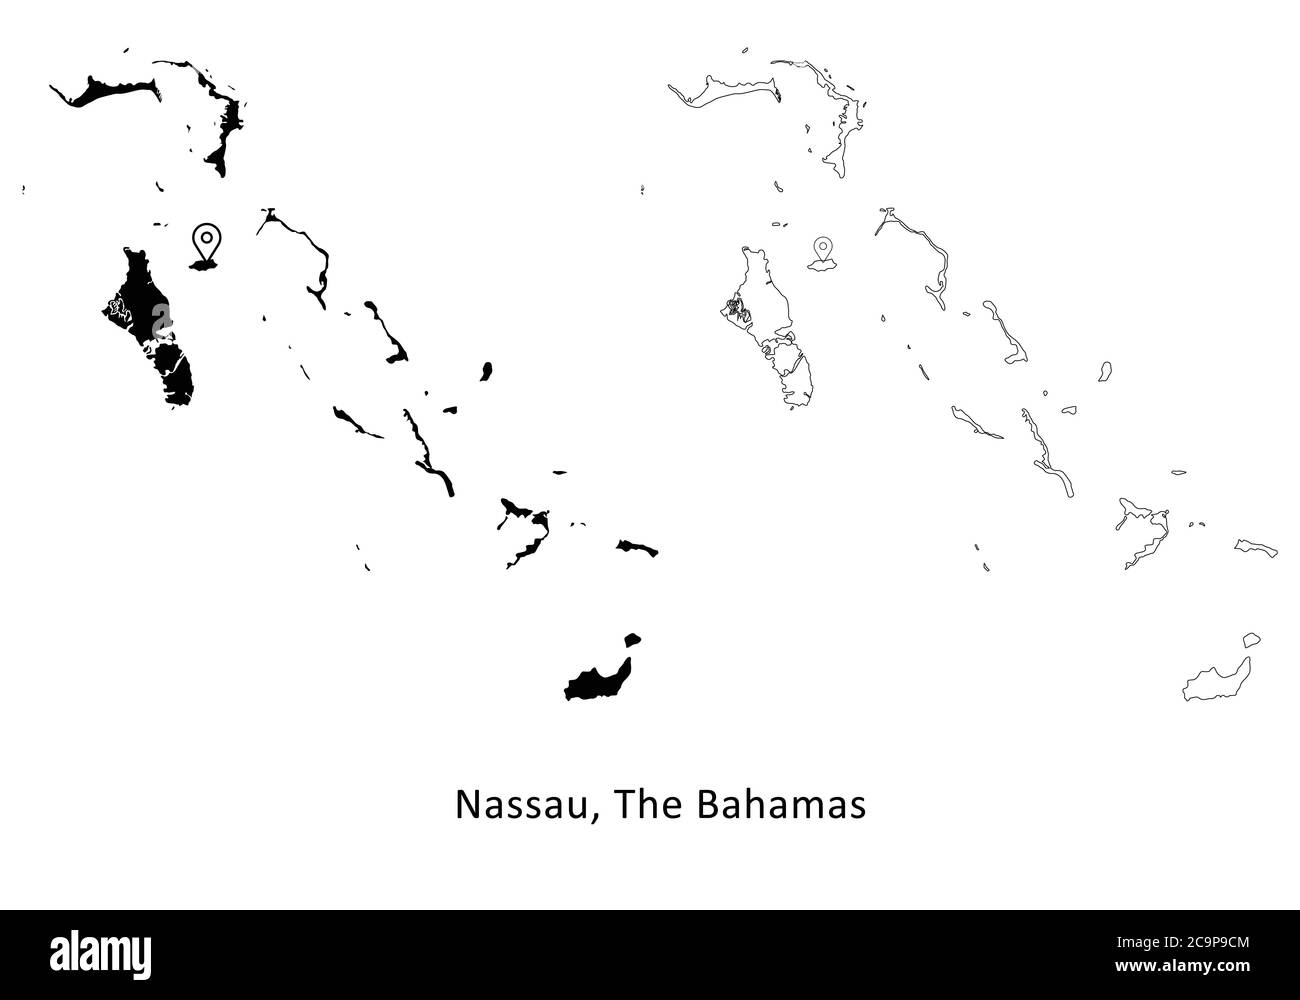 Nassau The Bahamas. Detailed Country Map with Capital City Location Pin. Black silhouette and outline maps isolated on white background. EPS Vector Stock Vector